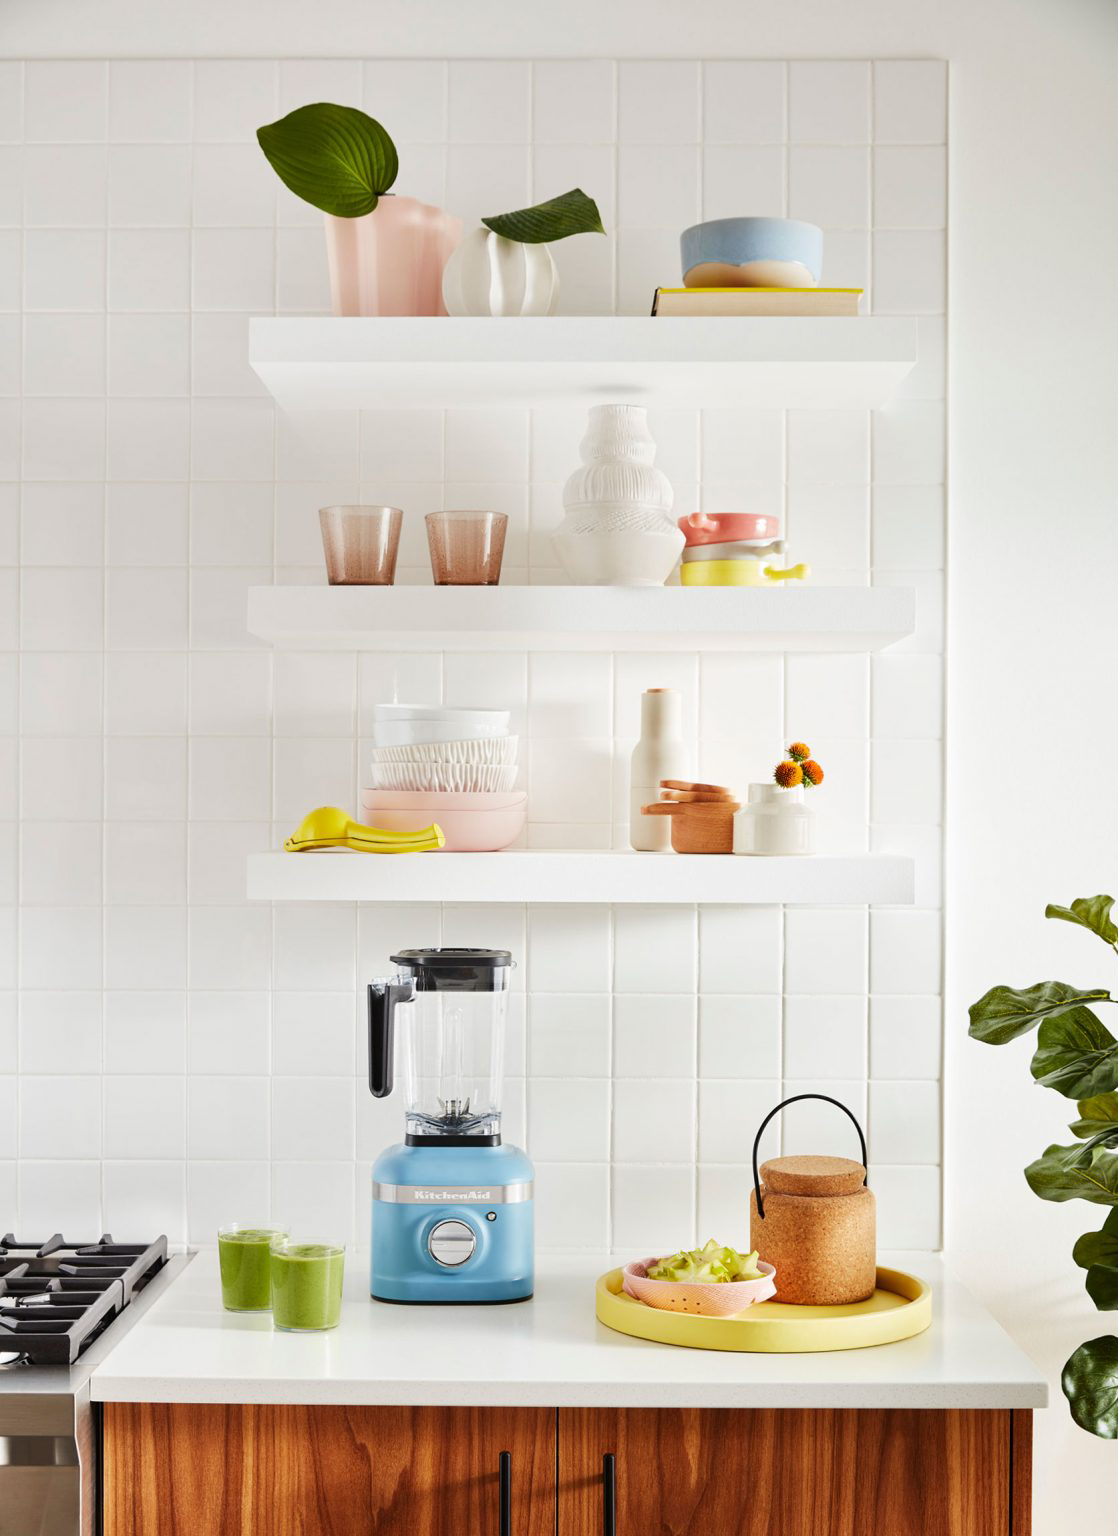 Open shelving with complementary colored dishes.